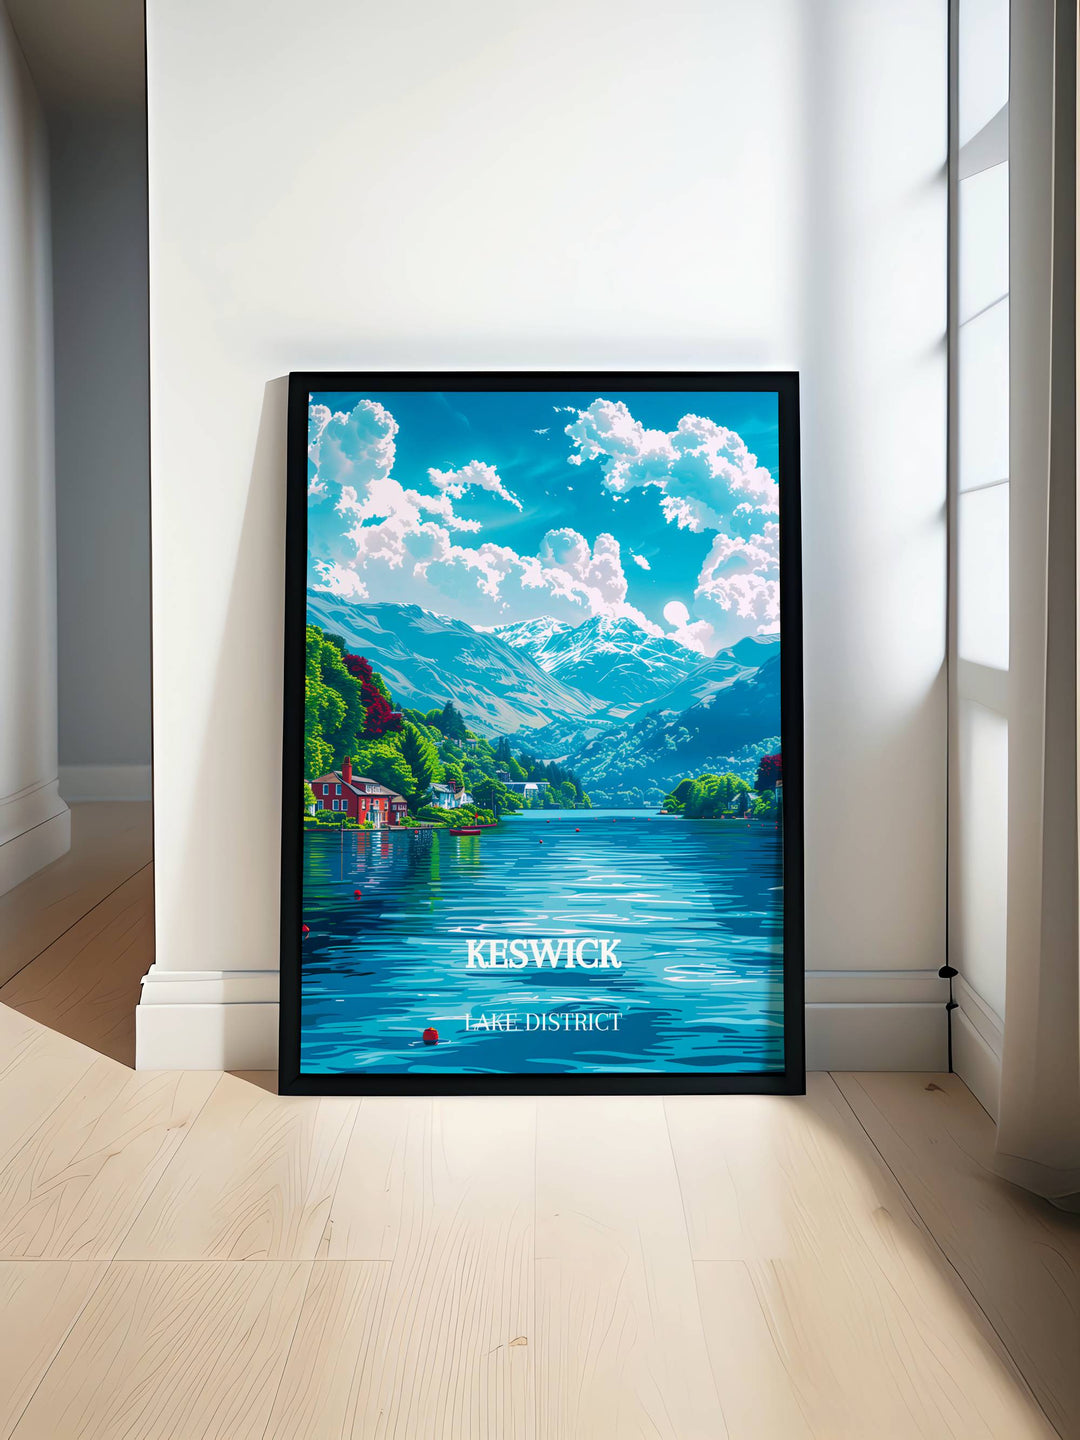 Abstract art print capturing the essence of Keswick Lake District with explosive colors and swirling patterns that mimic the dynamic natural landscape.